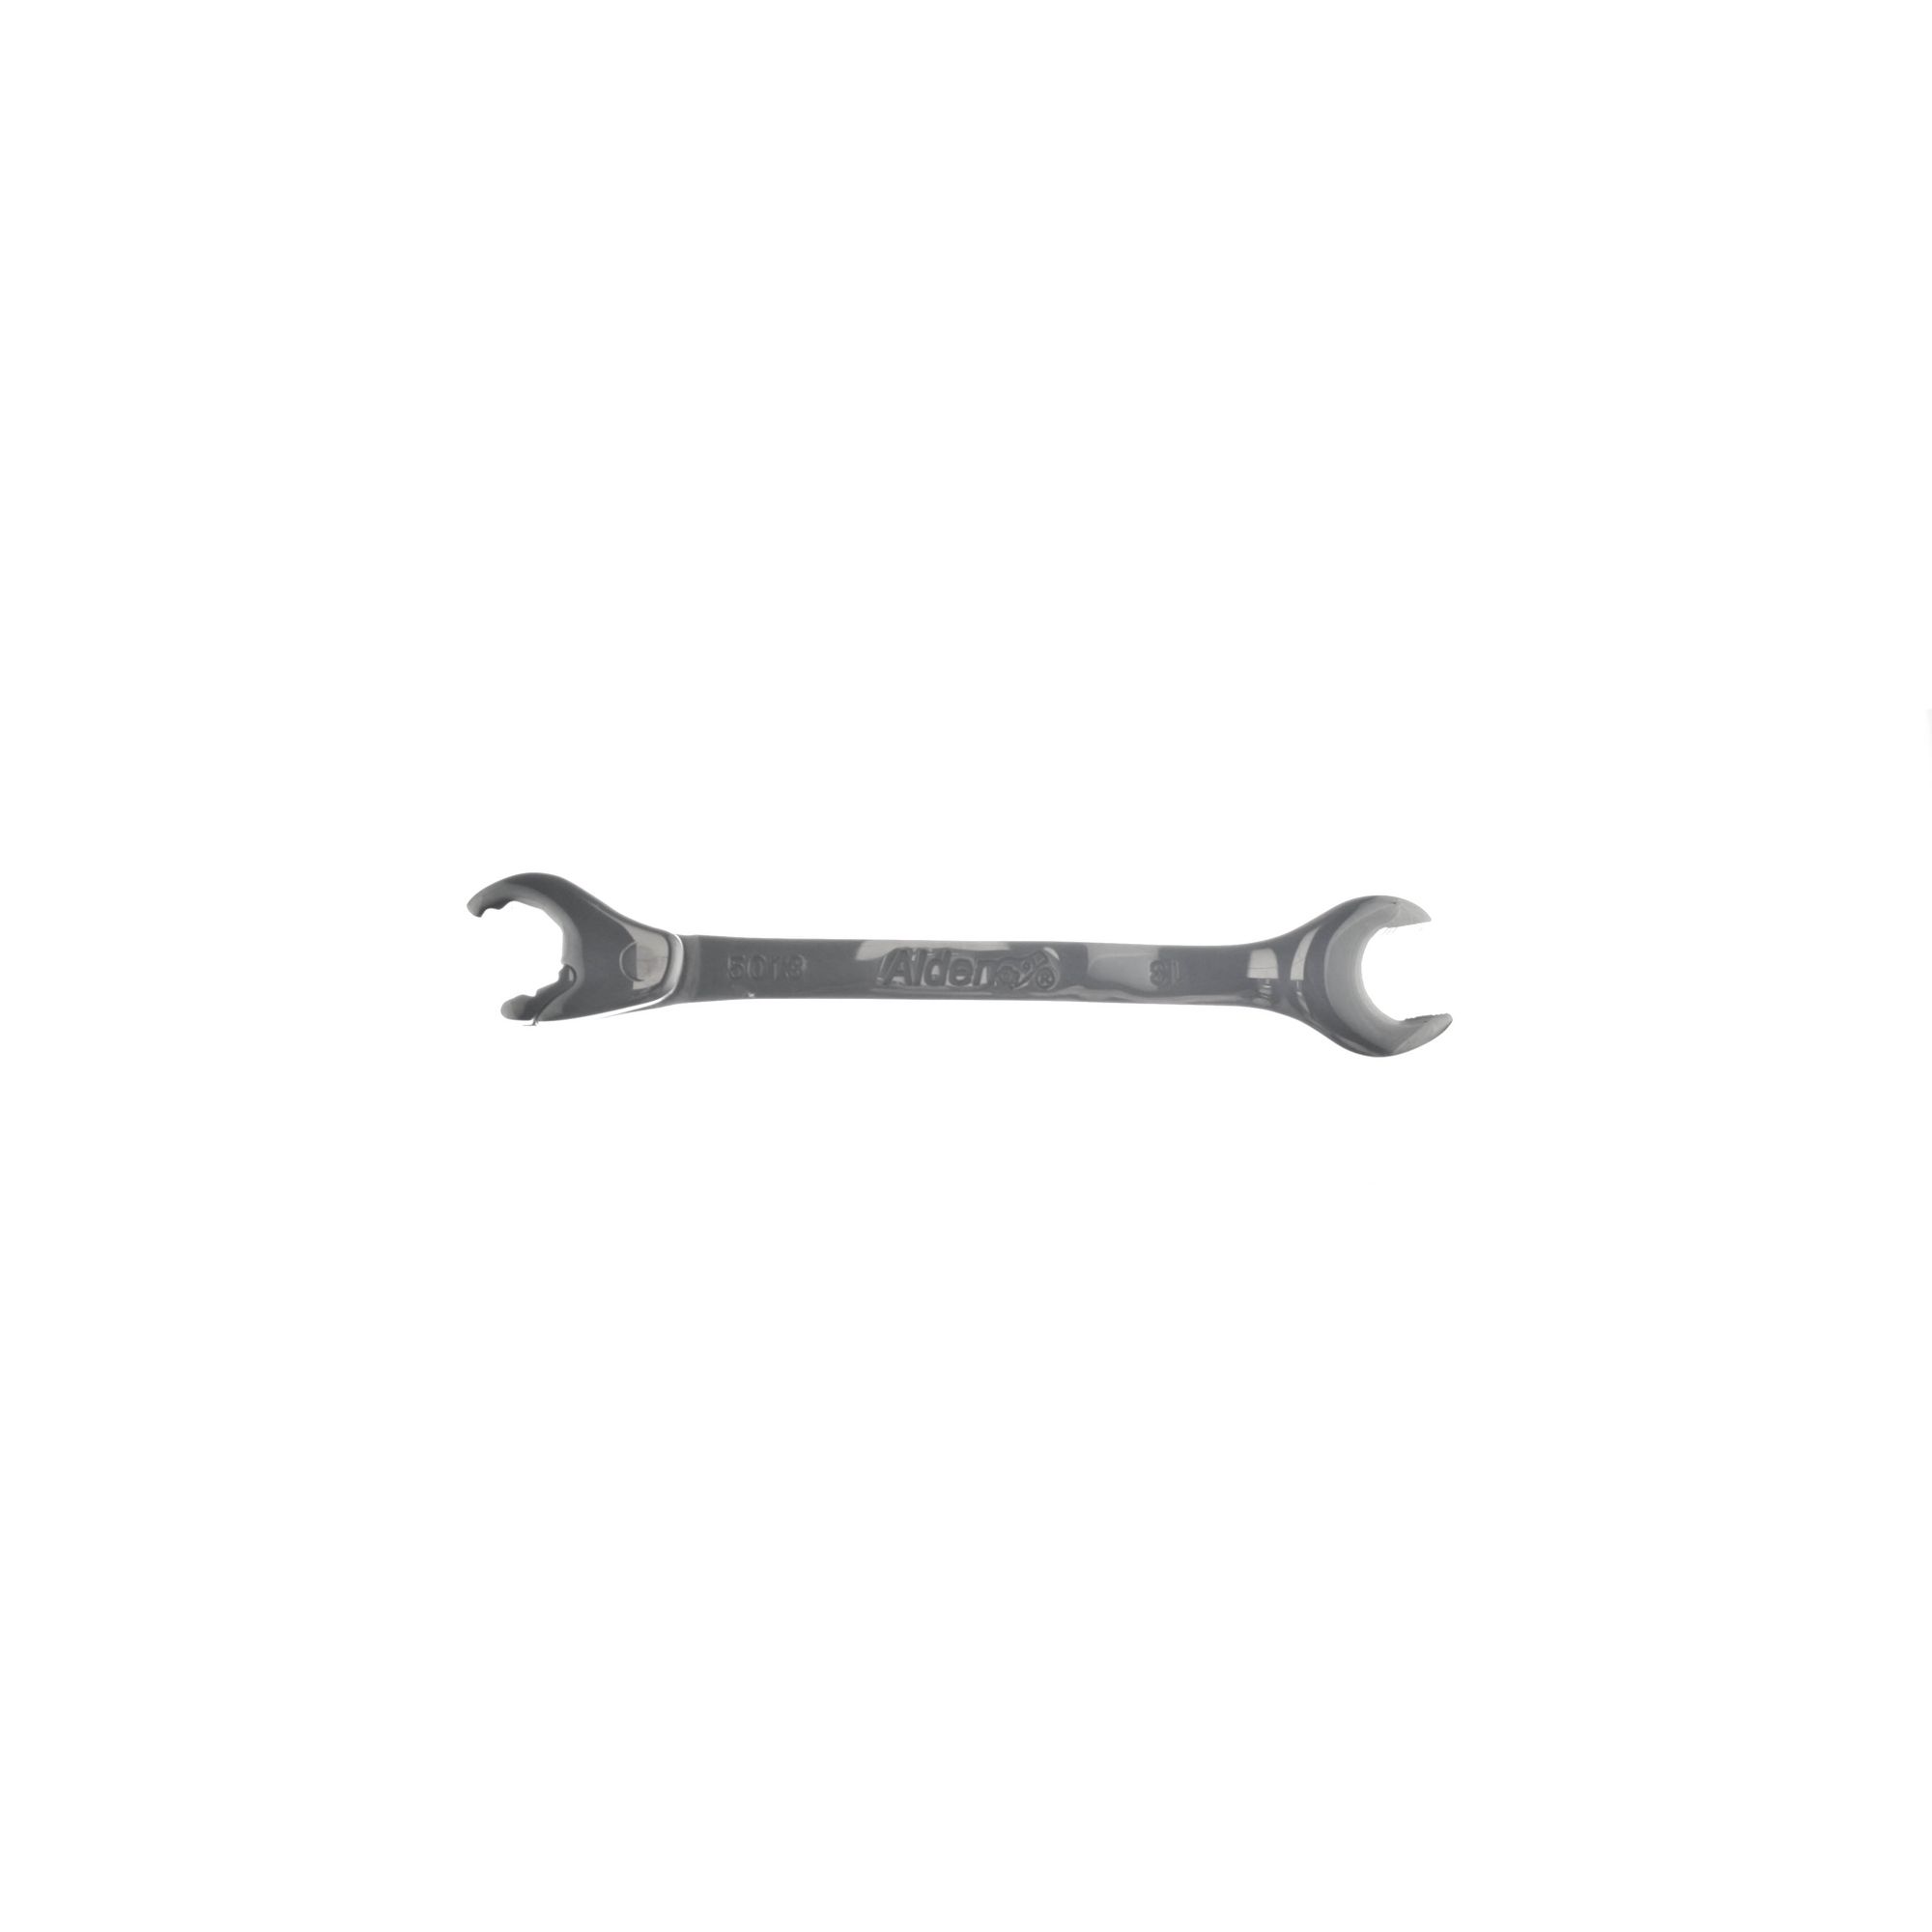 Chicago Brand 13mm Open-End Ratchet Wrench